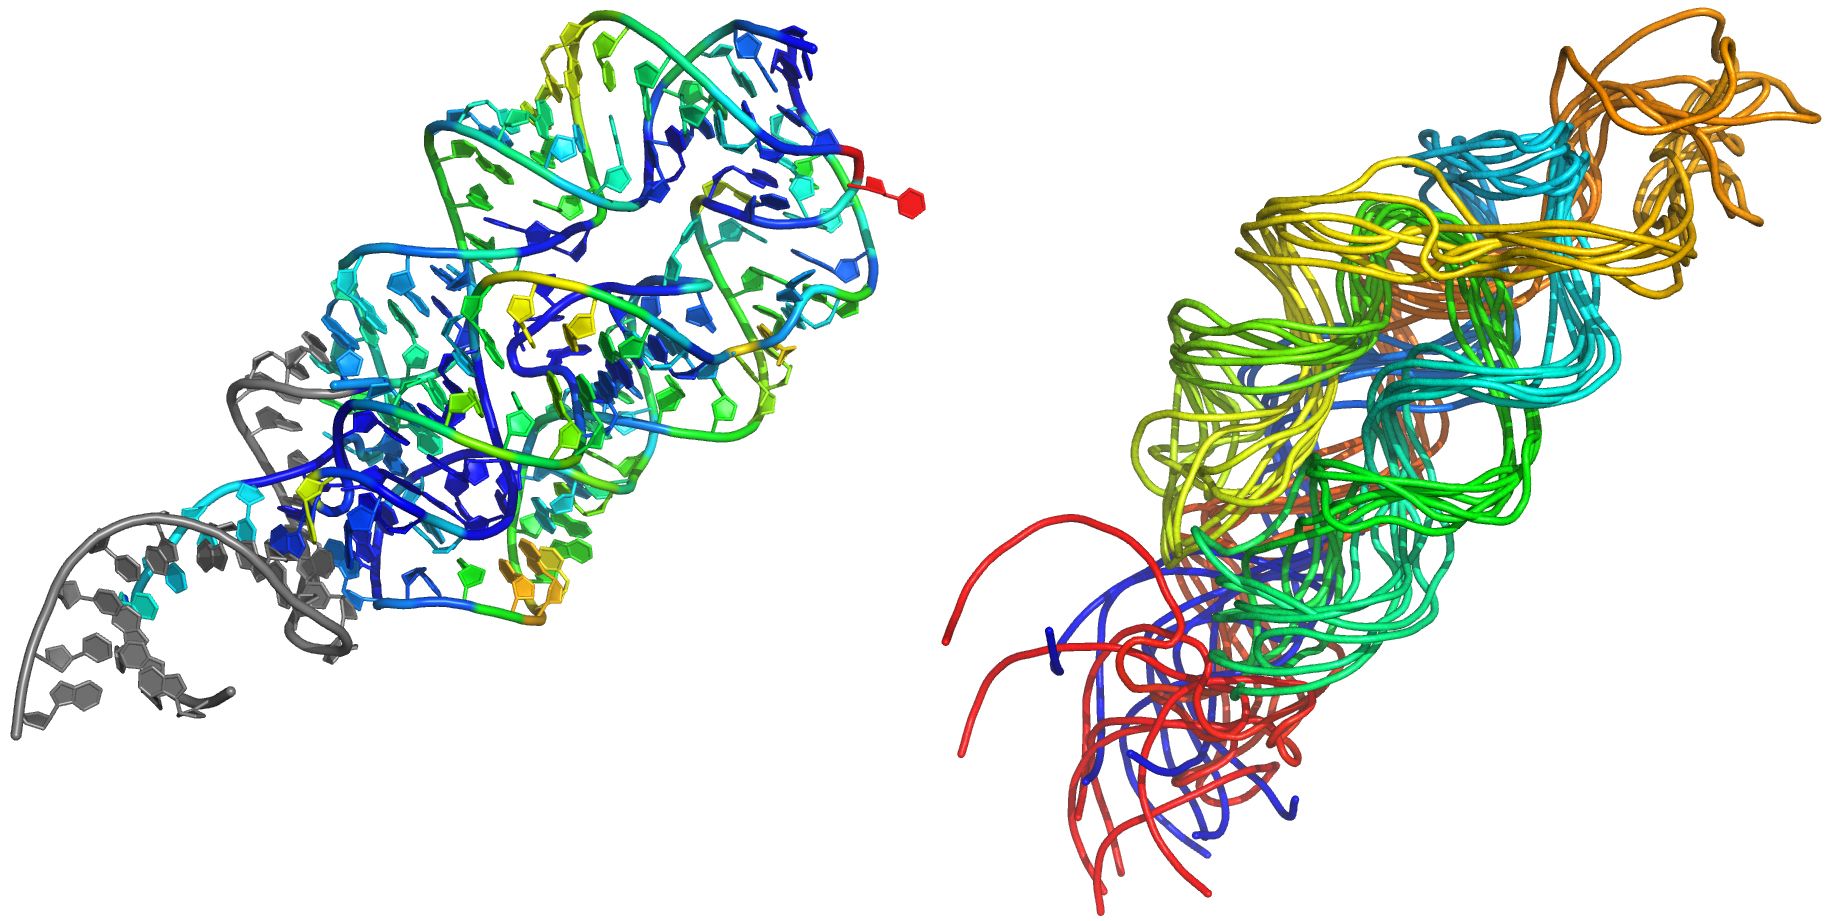 The left panel illustrates the structure of a metal-binding RNA. Each nucleotide is colored according to its experimentally-determined exposure to the outside solvent. Blue nucleotides tend to be buried inside the structure, and red nucleotides are mostly